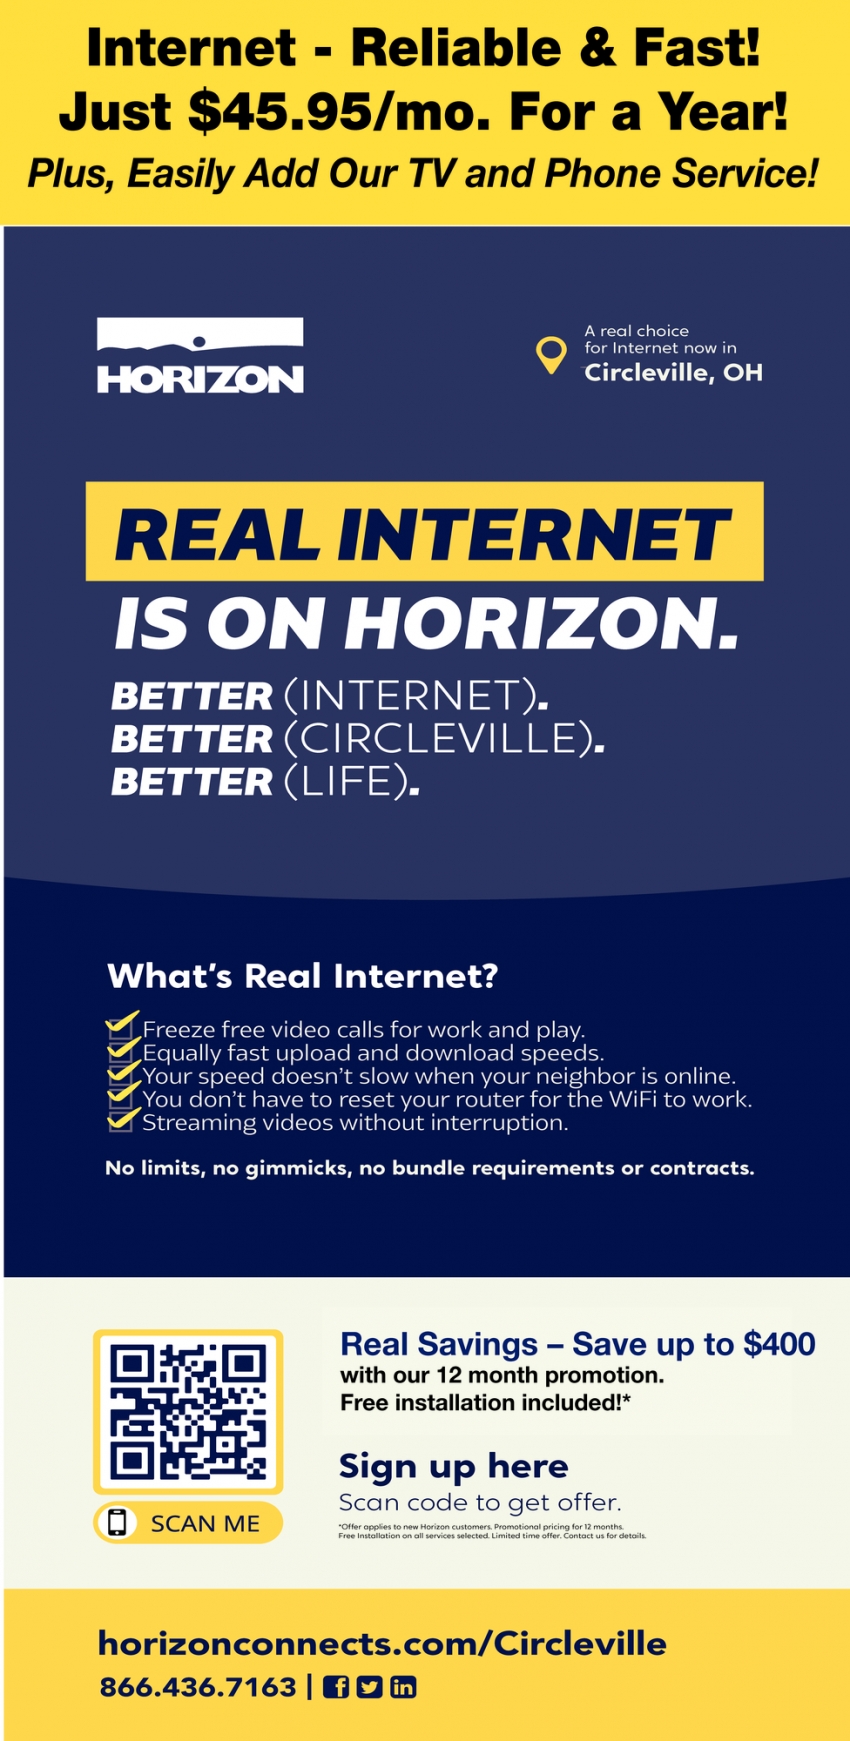 Internet - Reliable & Fast